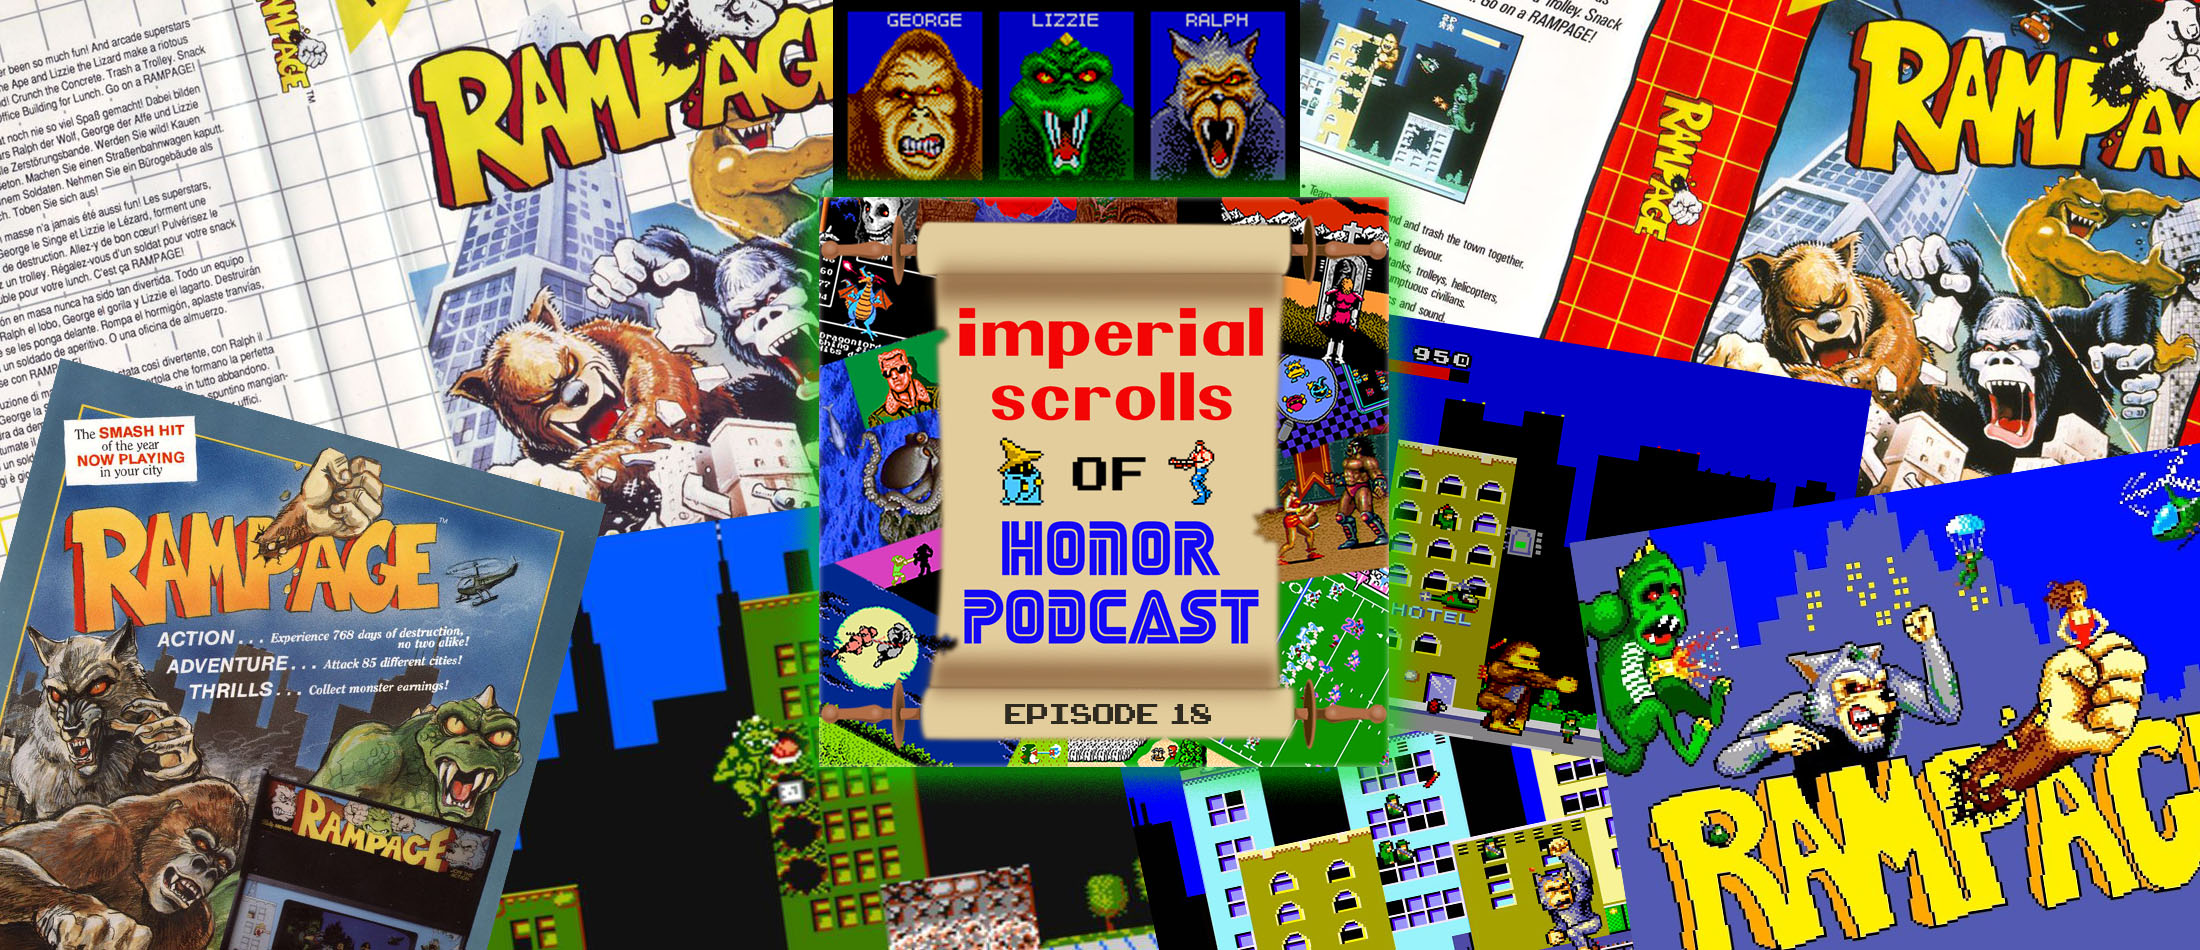 Imperial Scrolls of Honor Podcast - Episode 18 - Rampage (SMS)